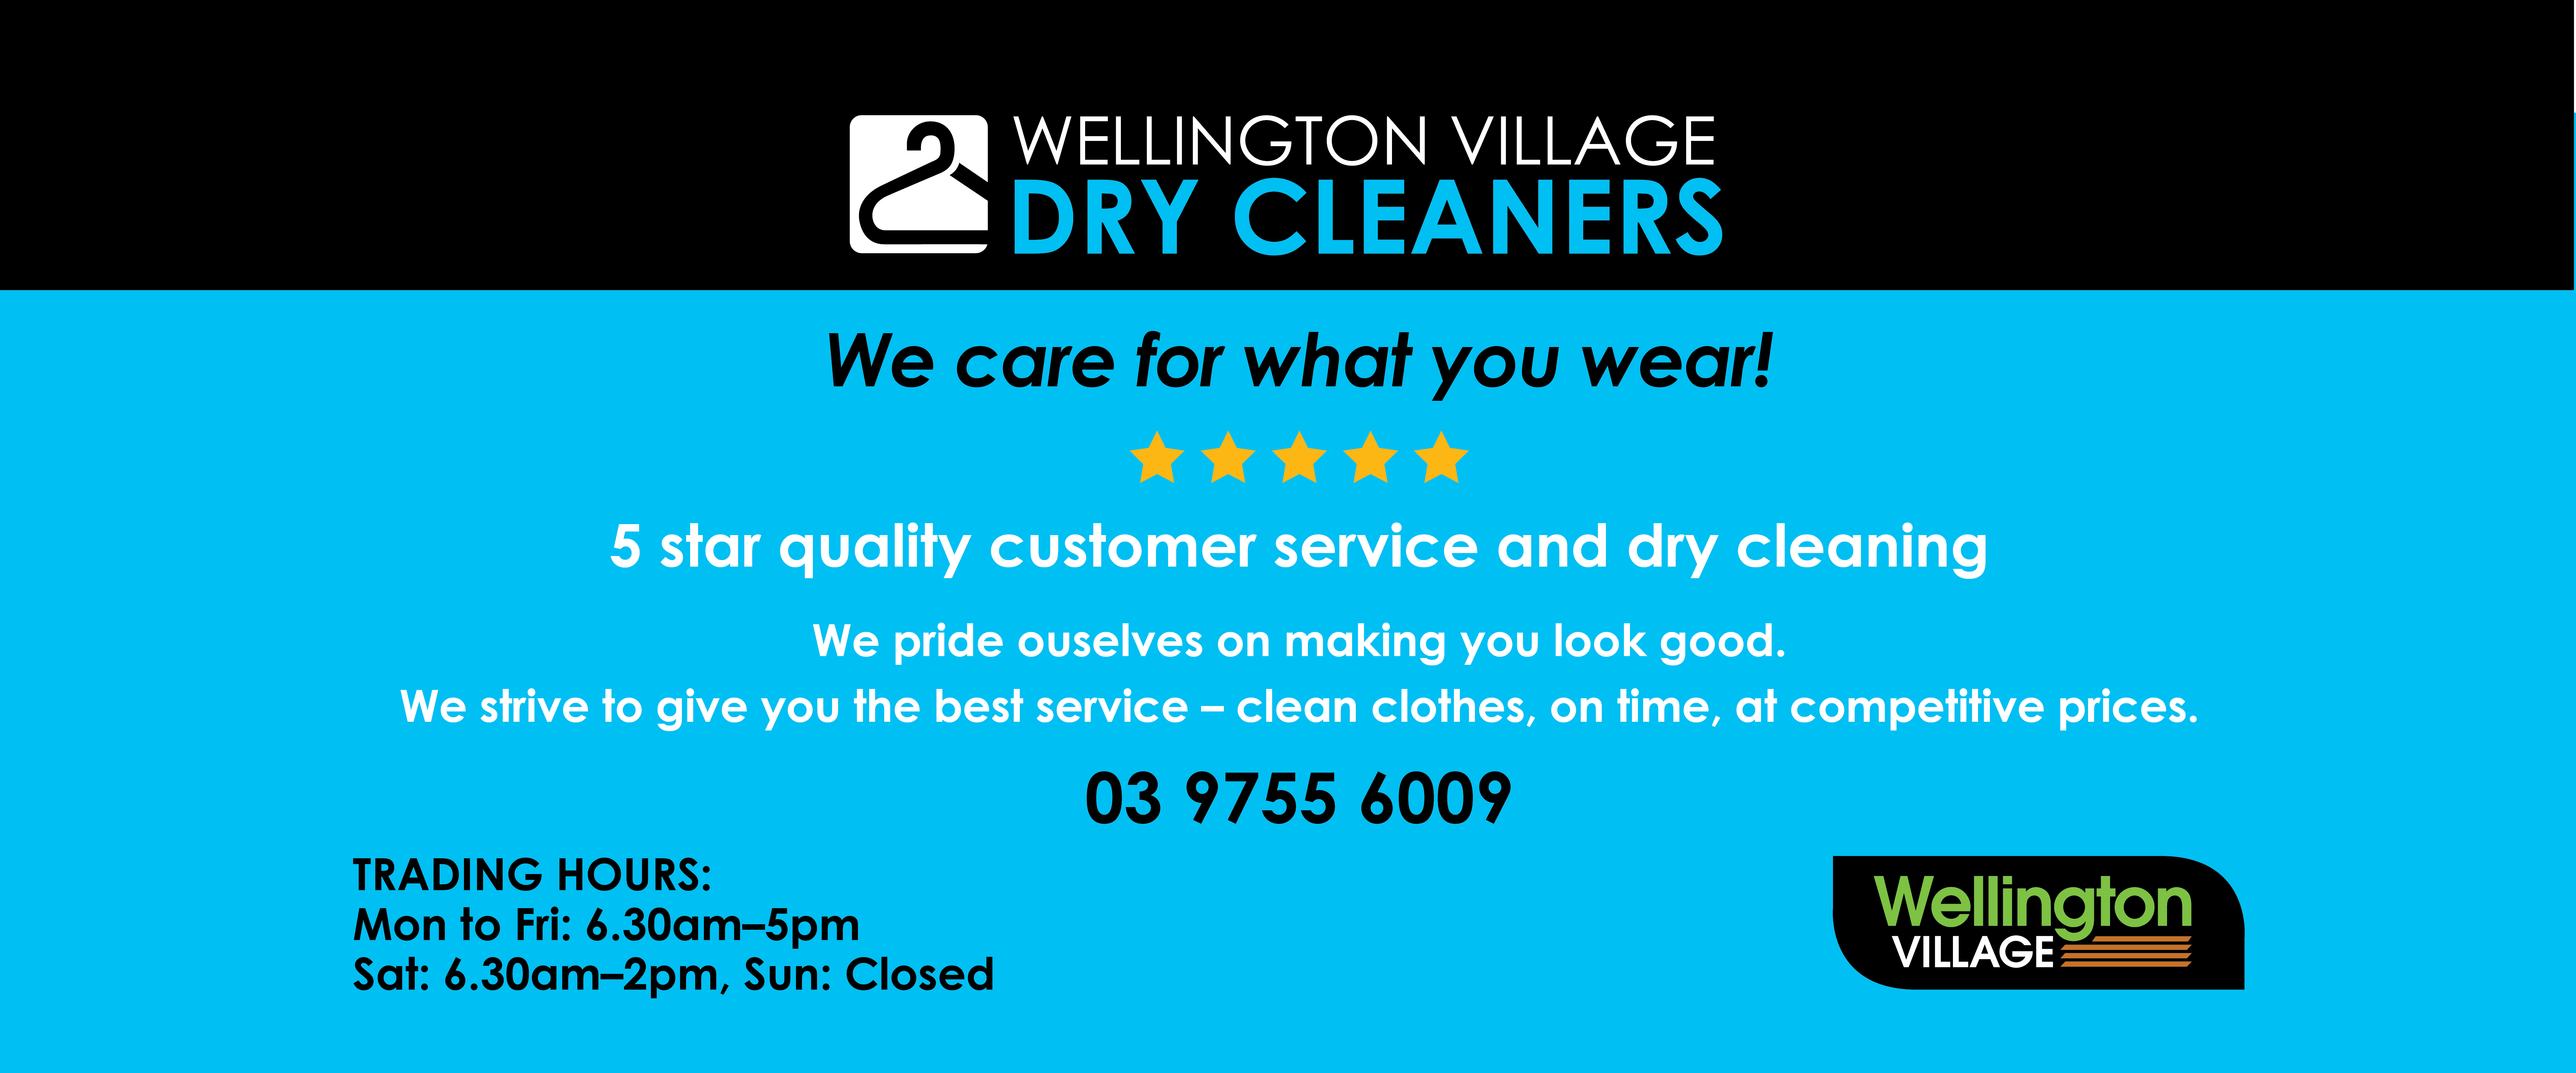 ad for Wellington Village dry cleaner